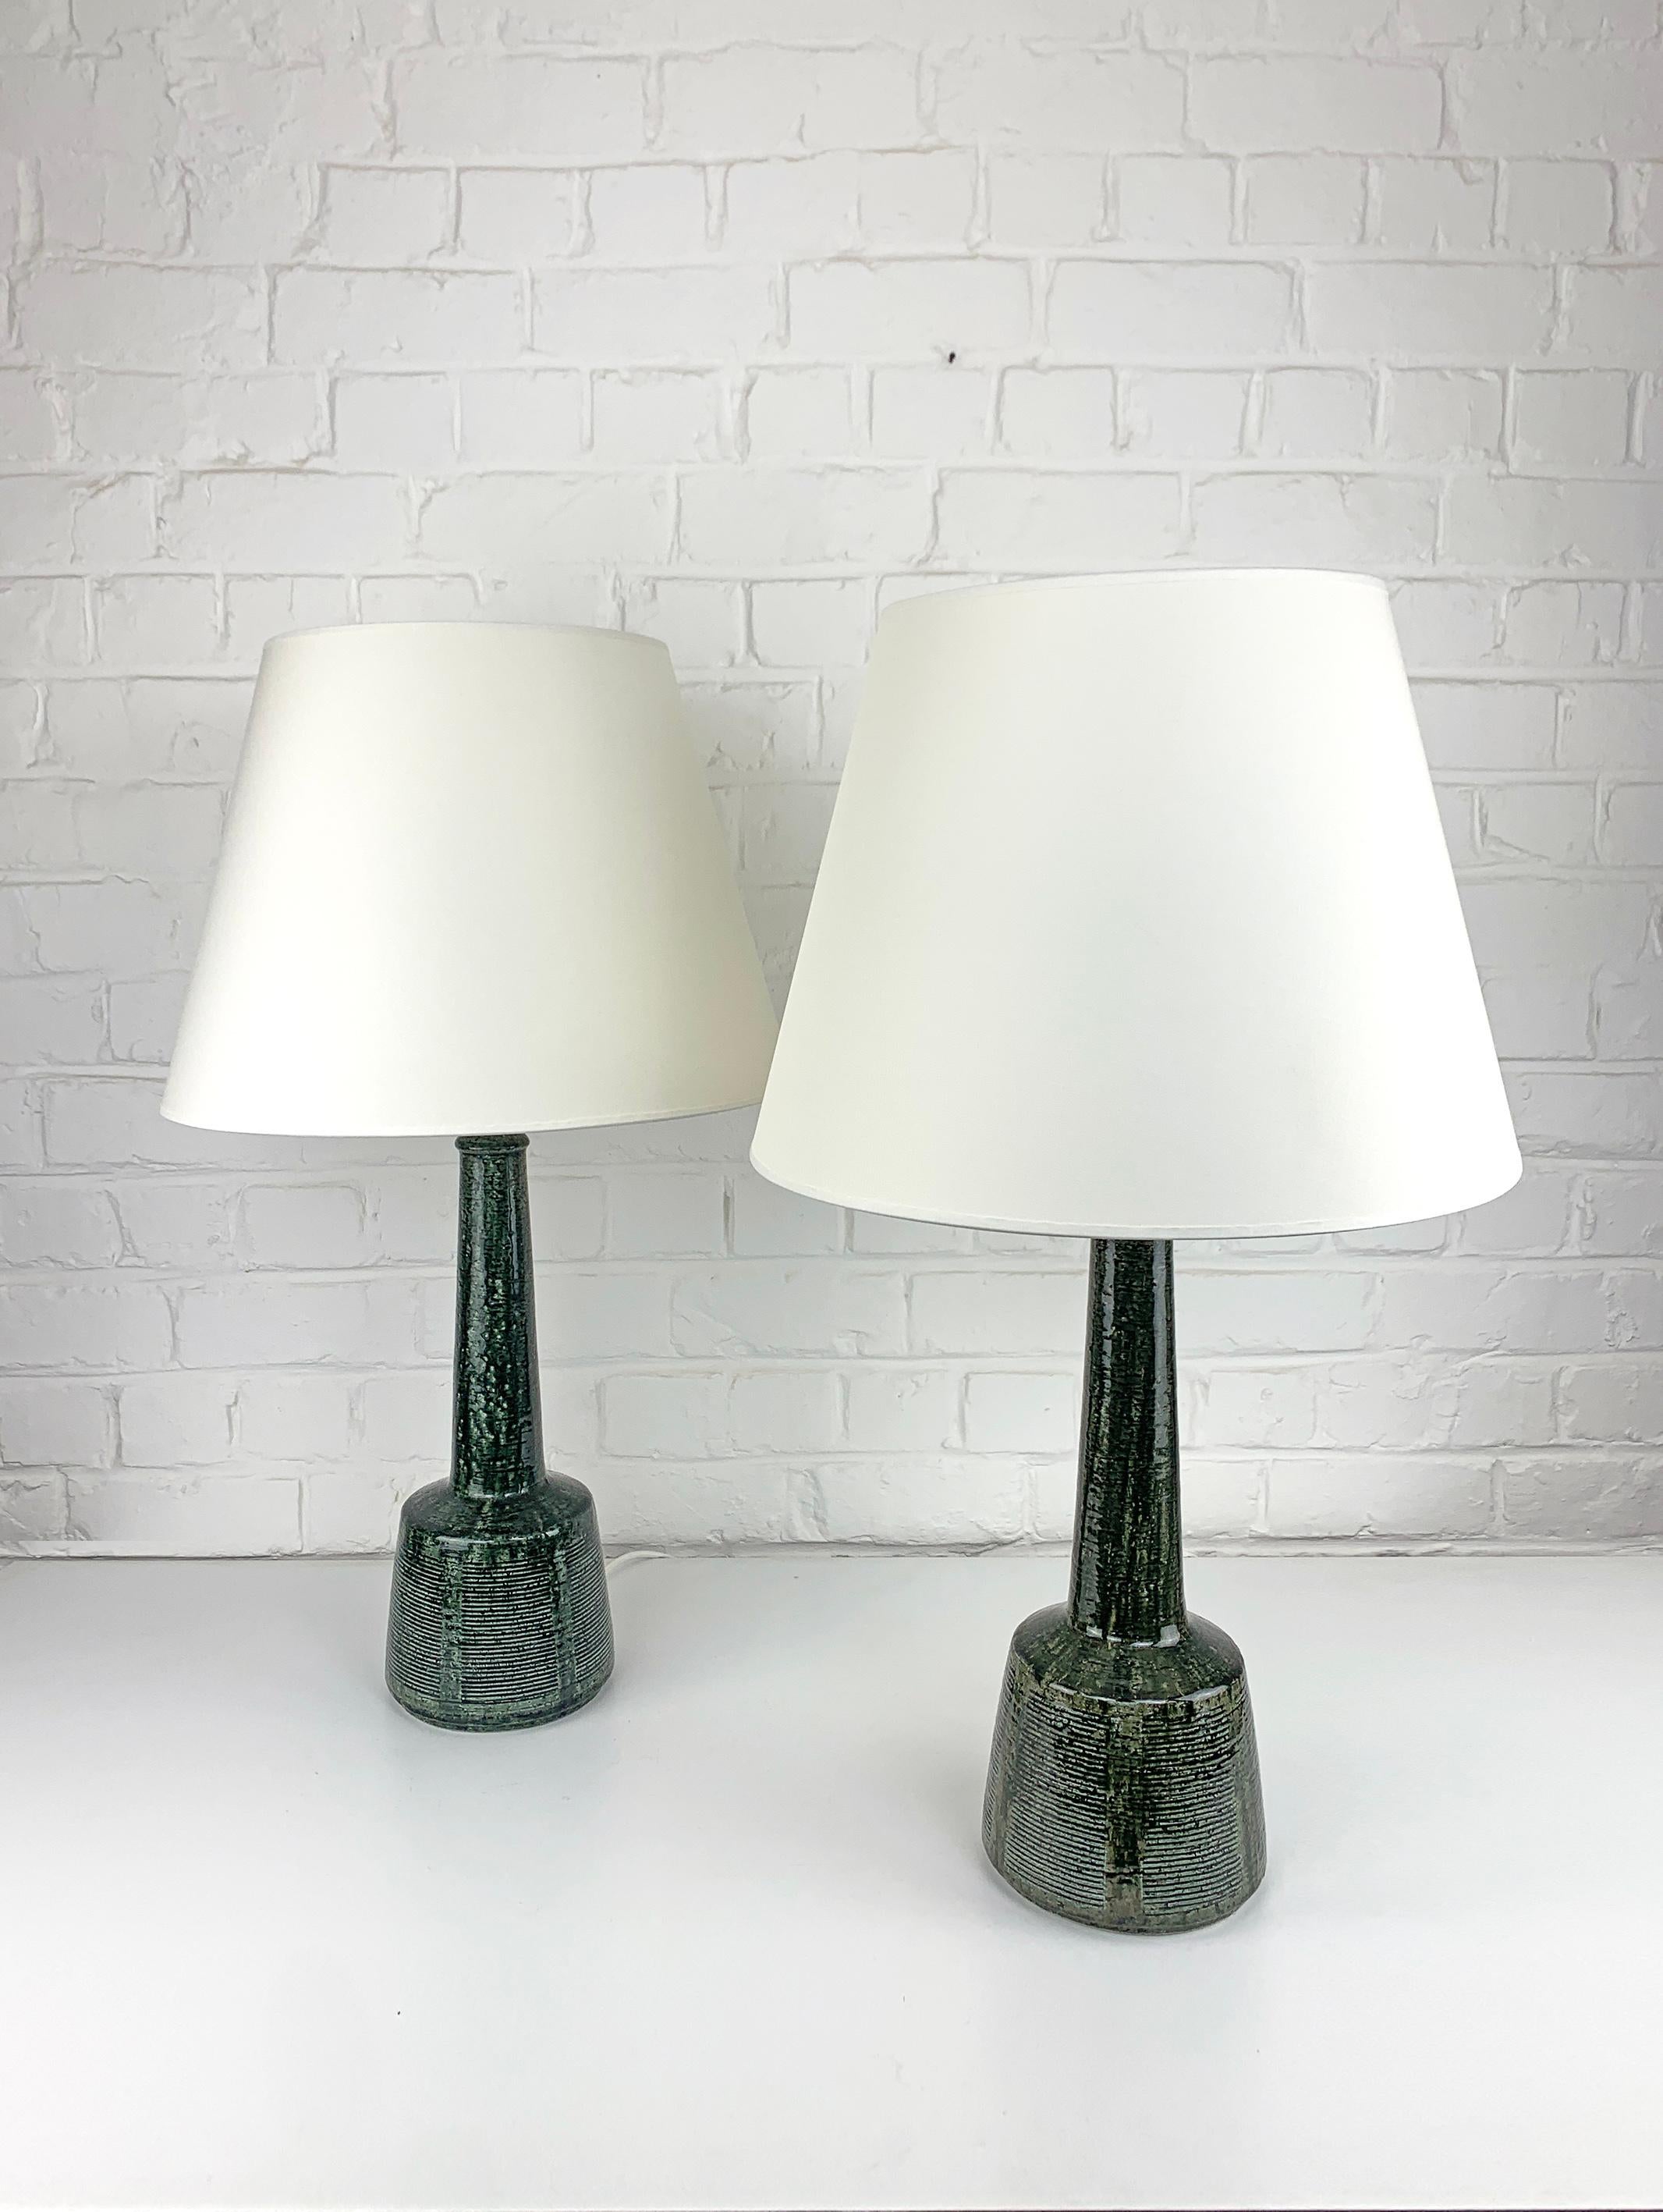 Glazed Pair of Tall Ceramic table lamps by Palshus, design by Esben Klint for Le Klint